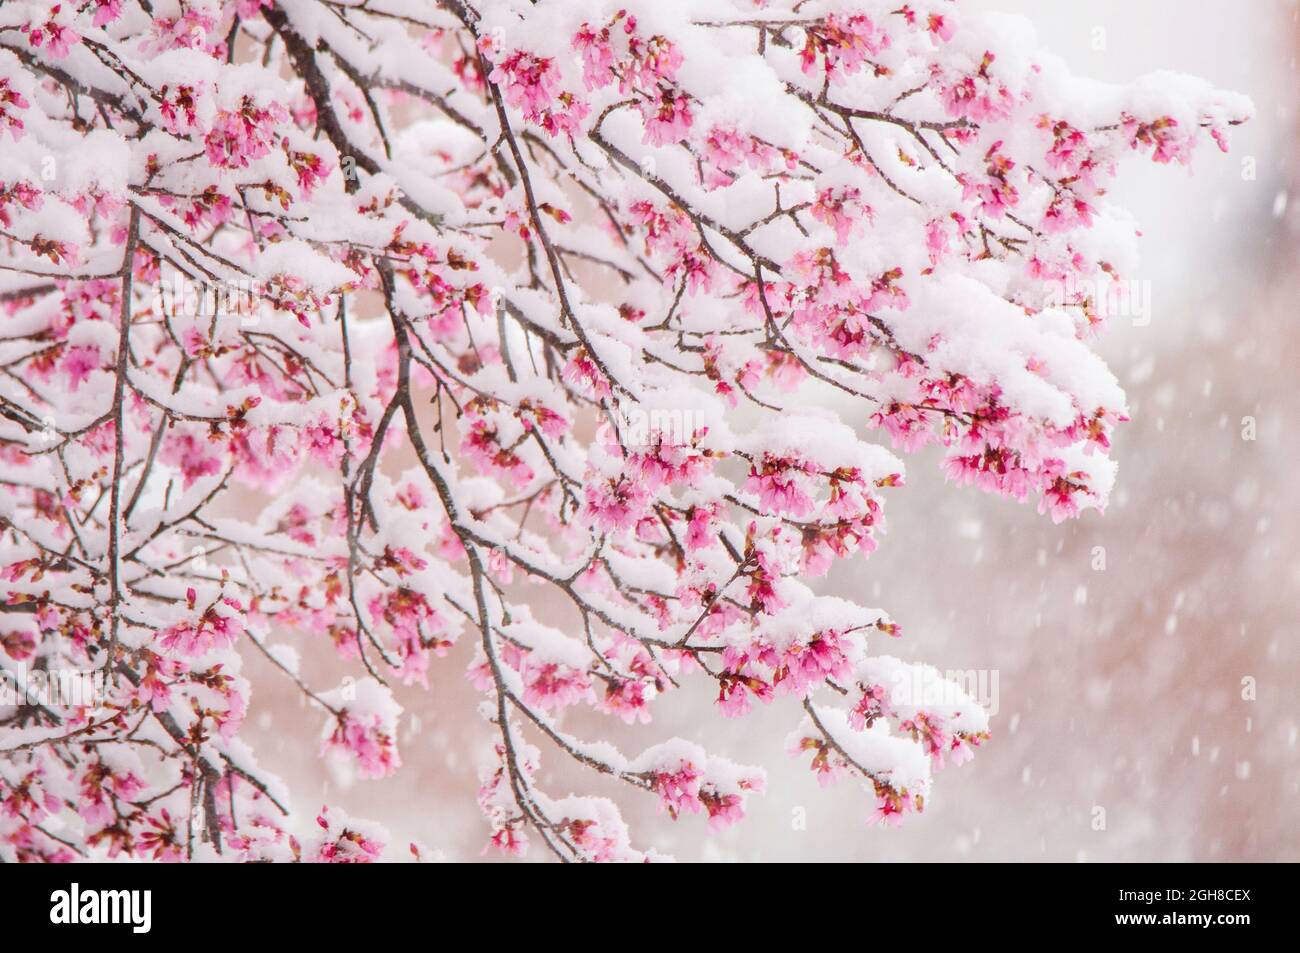 Seasons collide ... snow falls softly on the blossoms of a cherry tree in early spring in Alpharetta, Georgia, USA Stock Photo